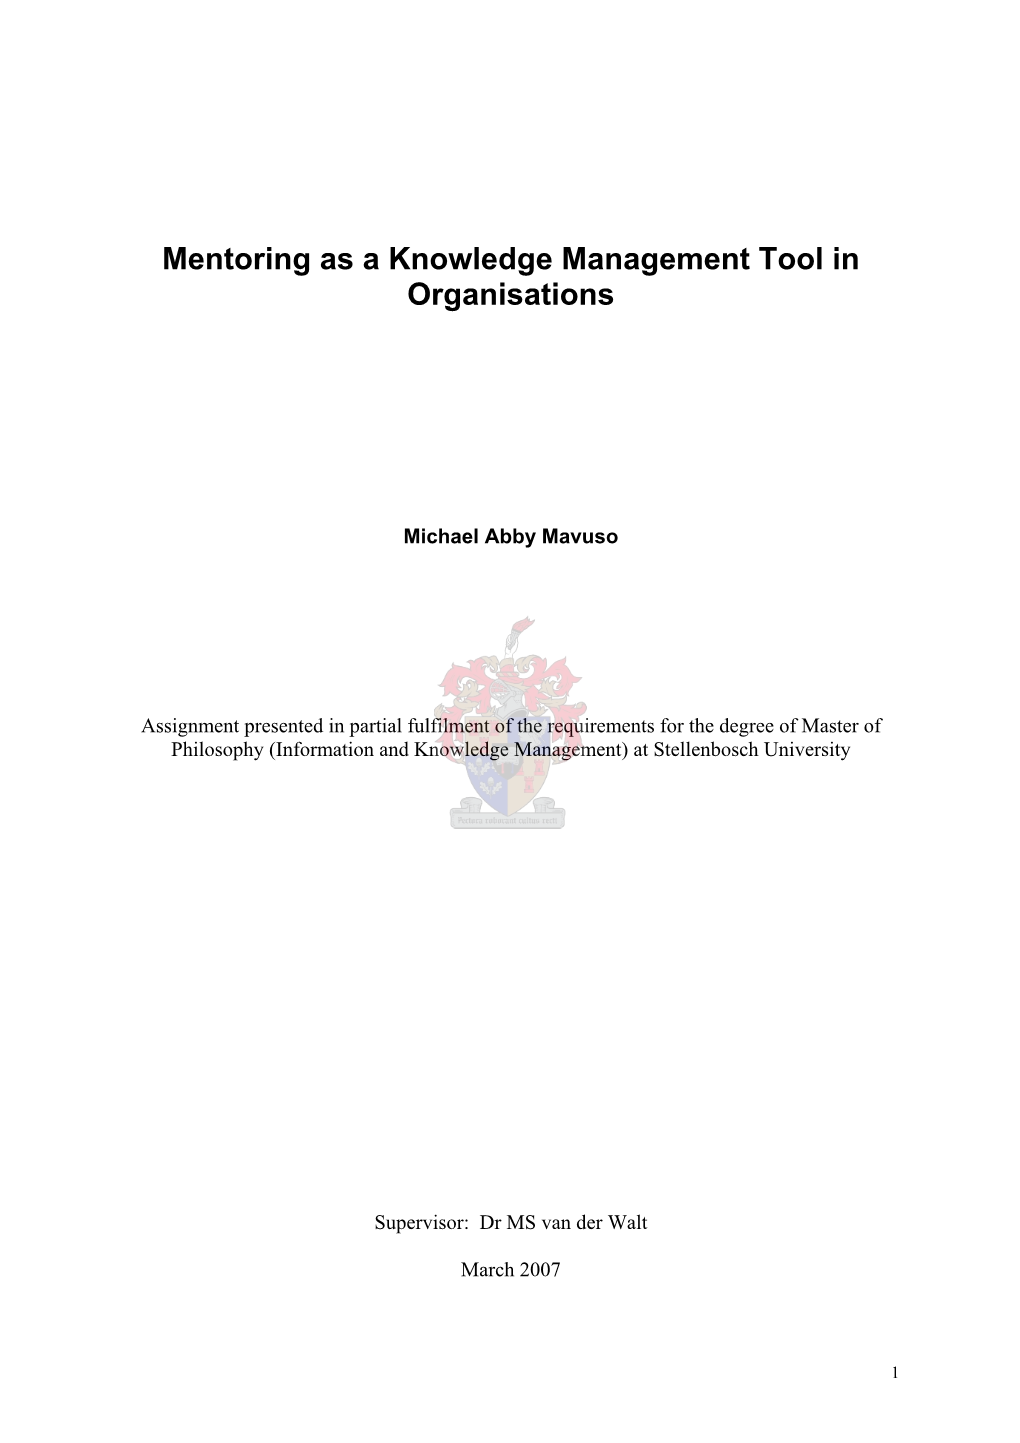 Mentoring As a Knowledge Management Tool in Organisations